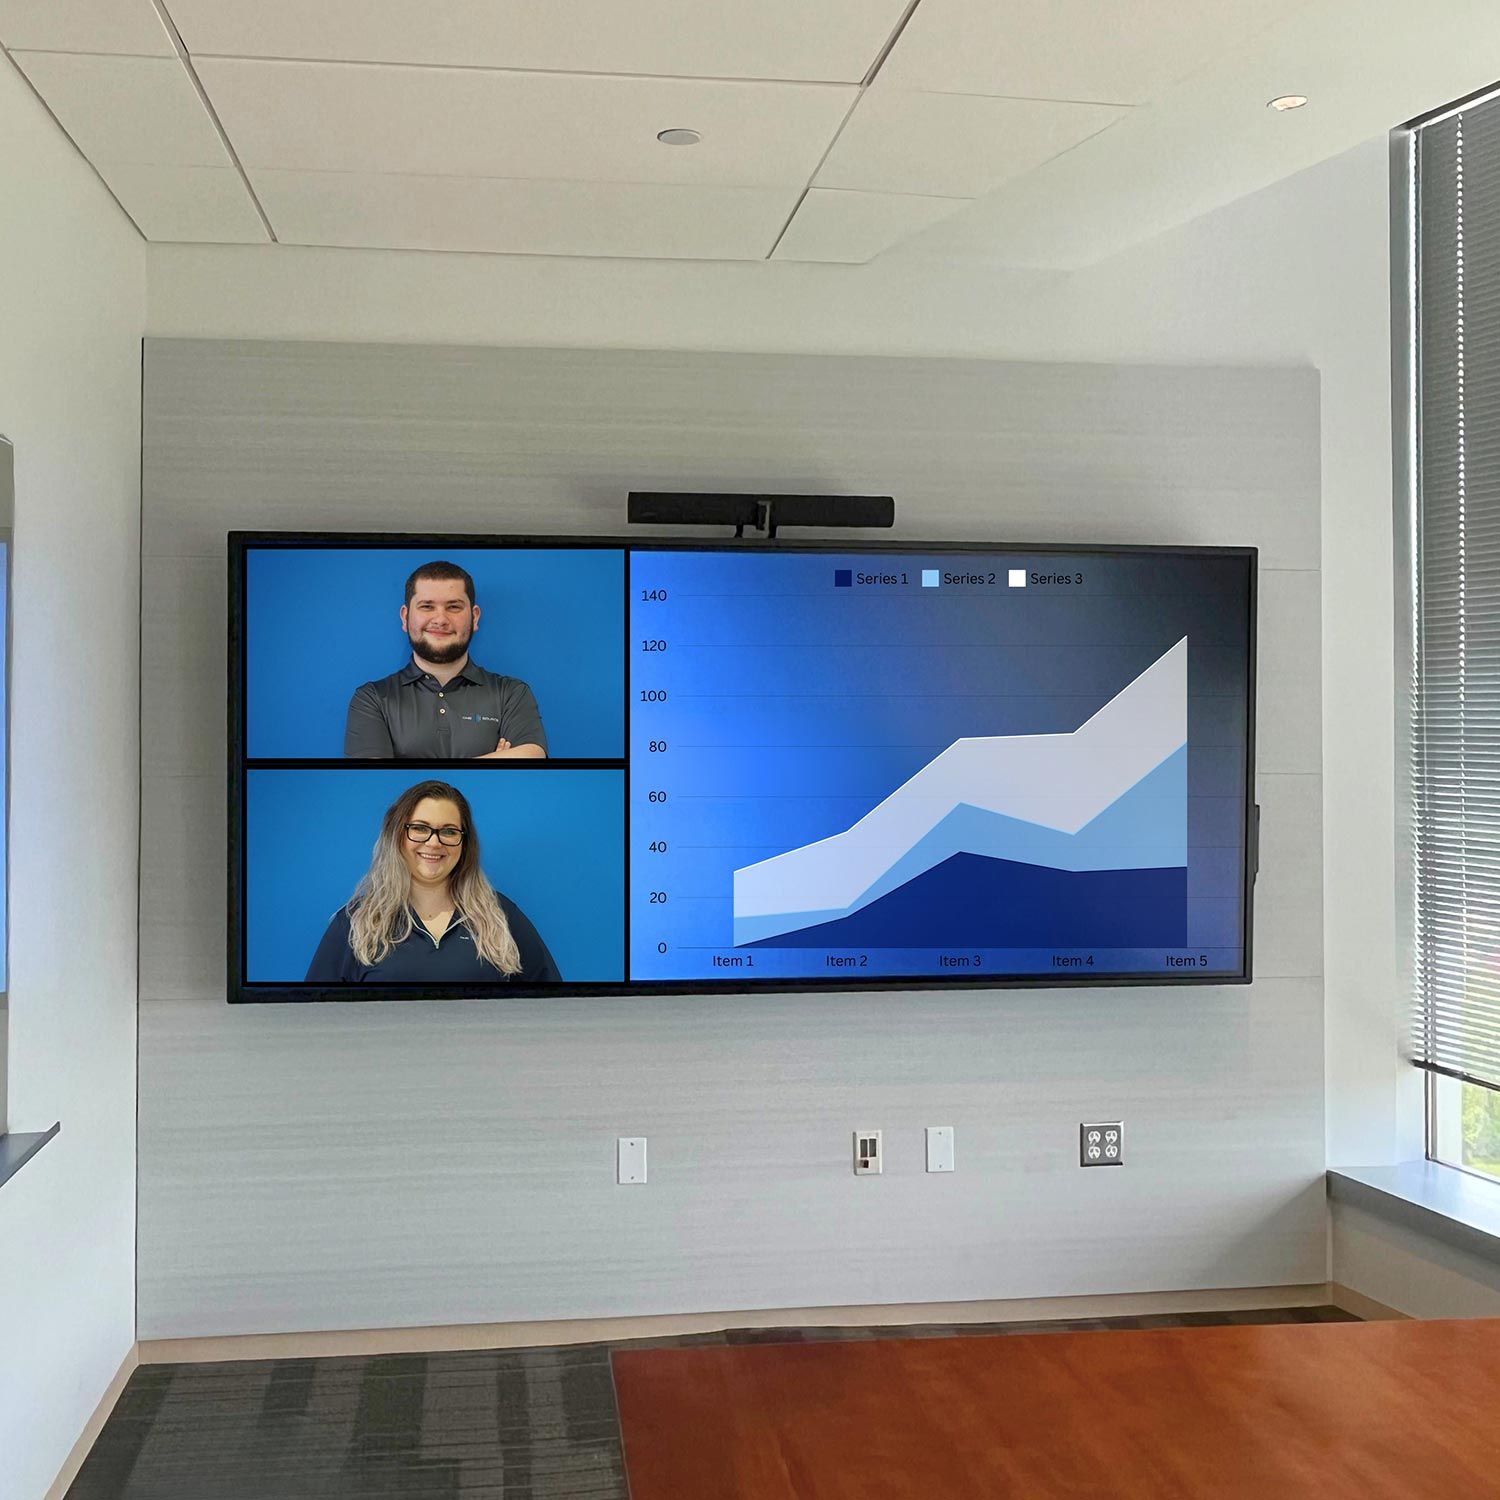 Big screen and video conferencing video camera in a conference room